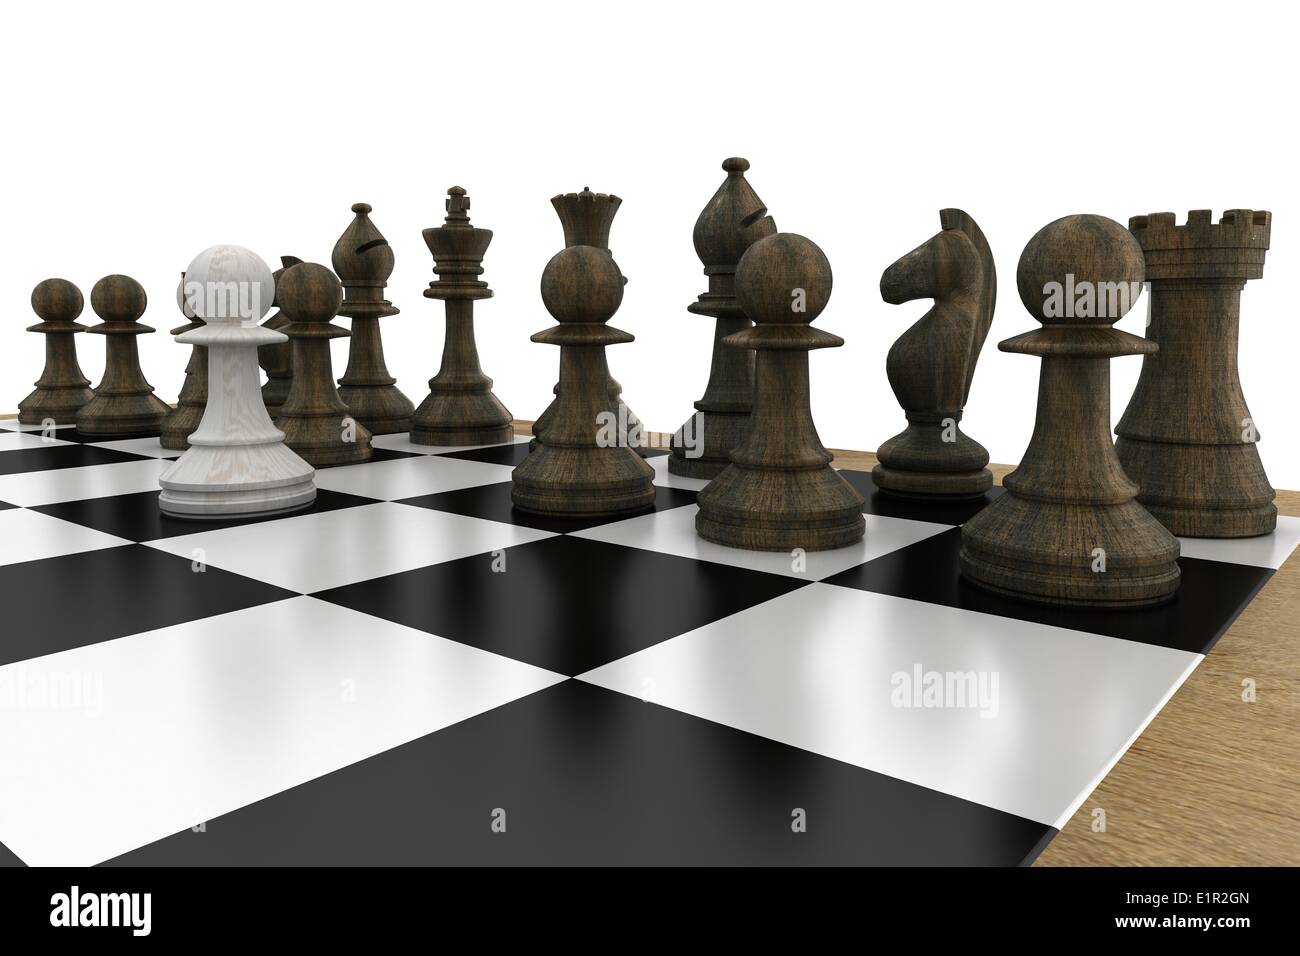 Black chess pieces on board with white pawn Stock Photo